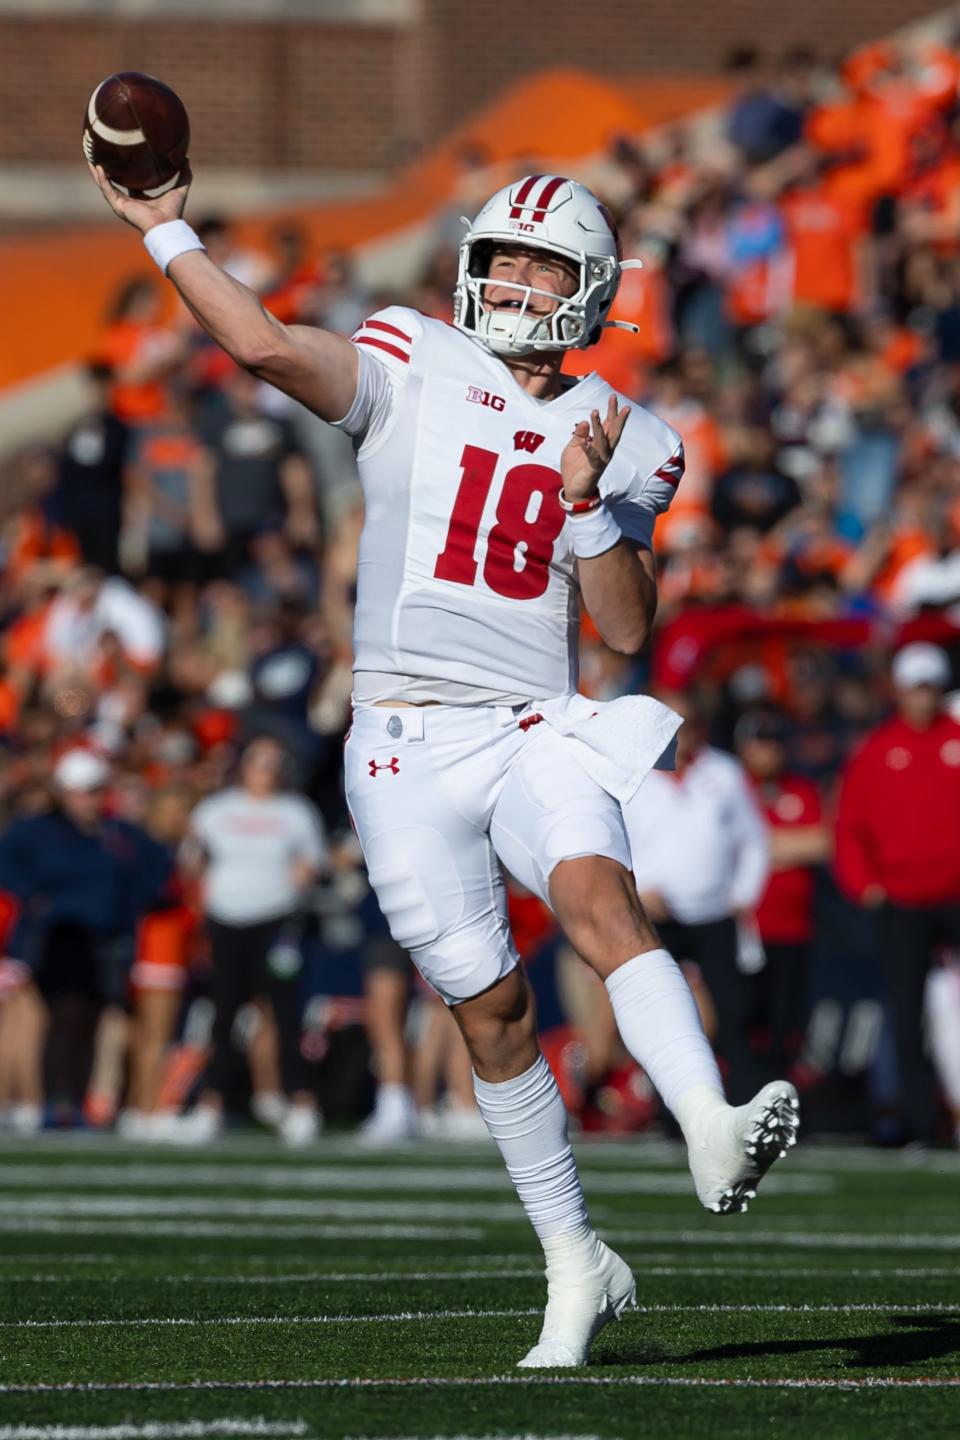 CHAMPAIGN, ILLINOIS - OCTOBER 21: Braedyn Locke #18 of the Wisconsin Badgers throws the ball during the first half against the Illinois Fighting Illini at Memorial Stadium on October 21, 2023 in Champaign, Illinois. (Photo by Michael Hickey/Getty Images)